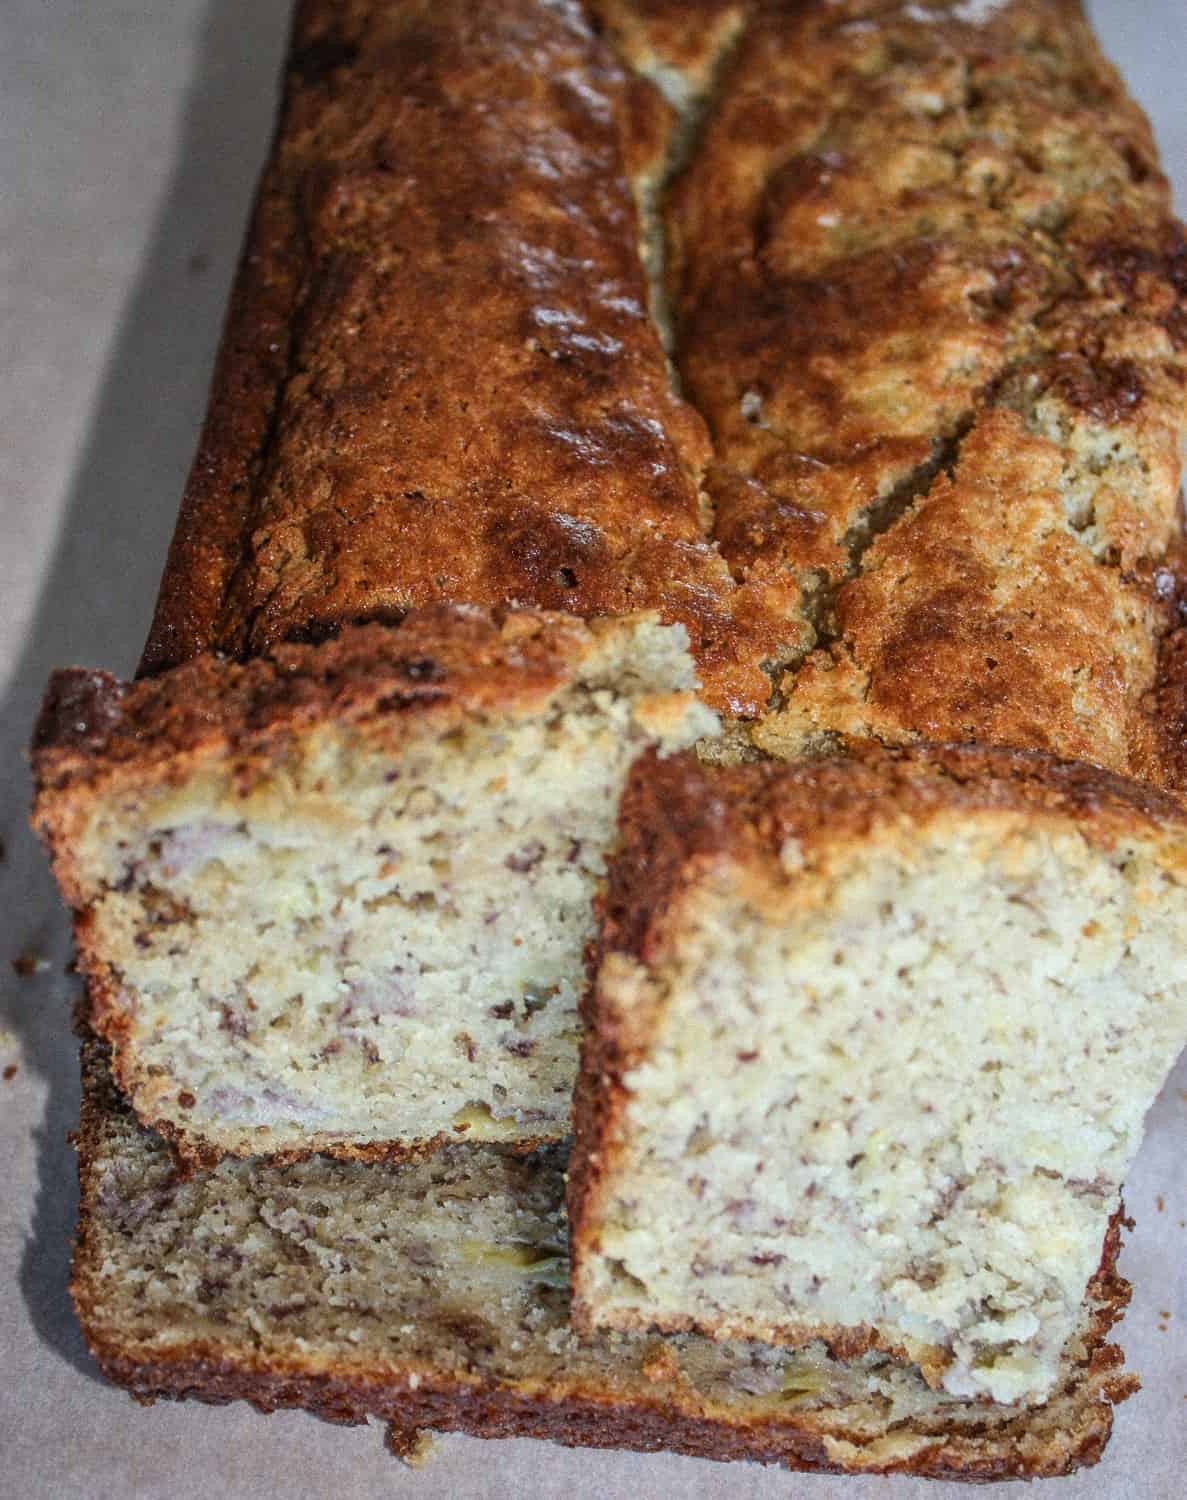 This moist banana bread is a staple in our home.  It is one of the first recipes I converted when I learned I could no longer eat gluten.